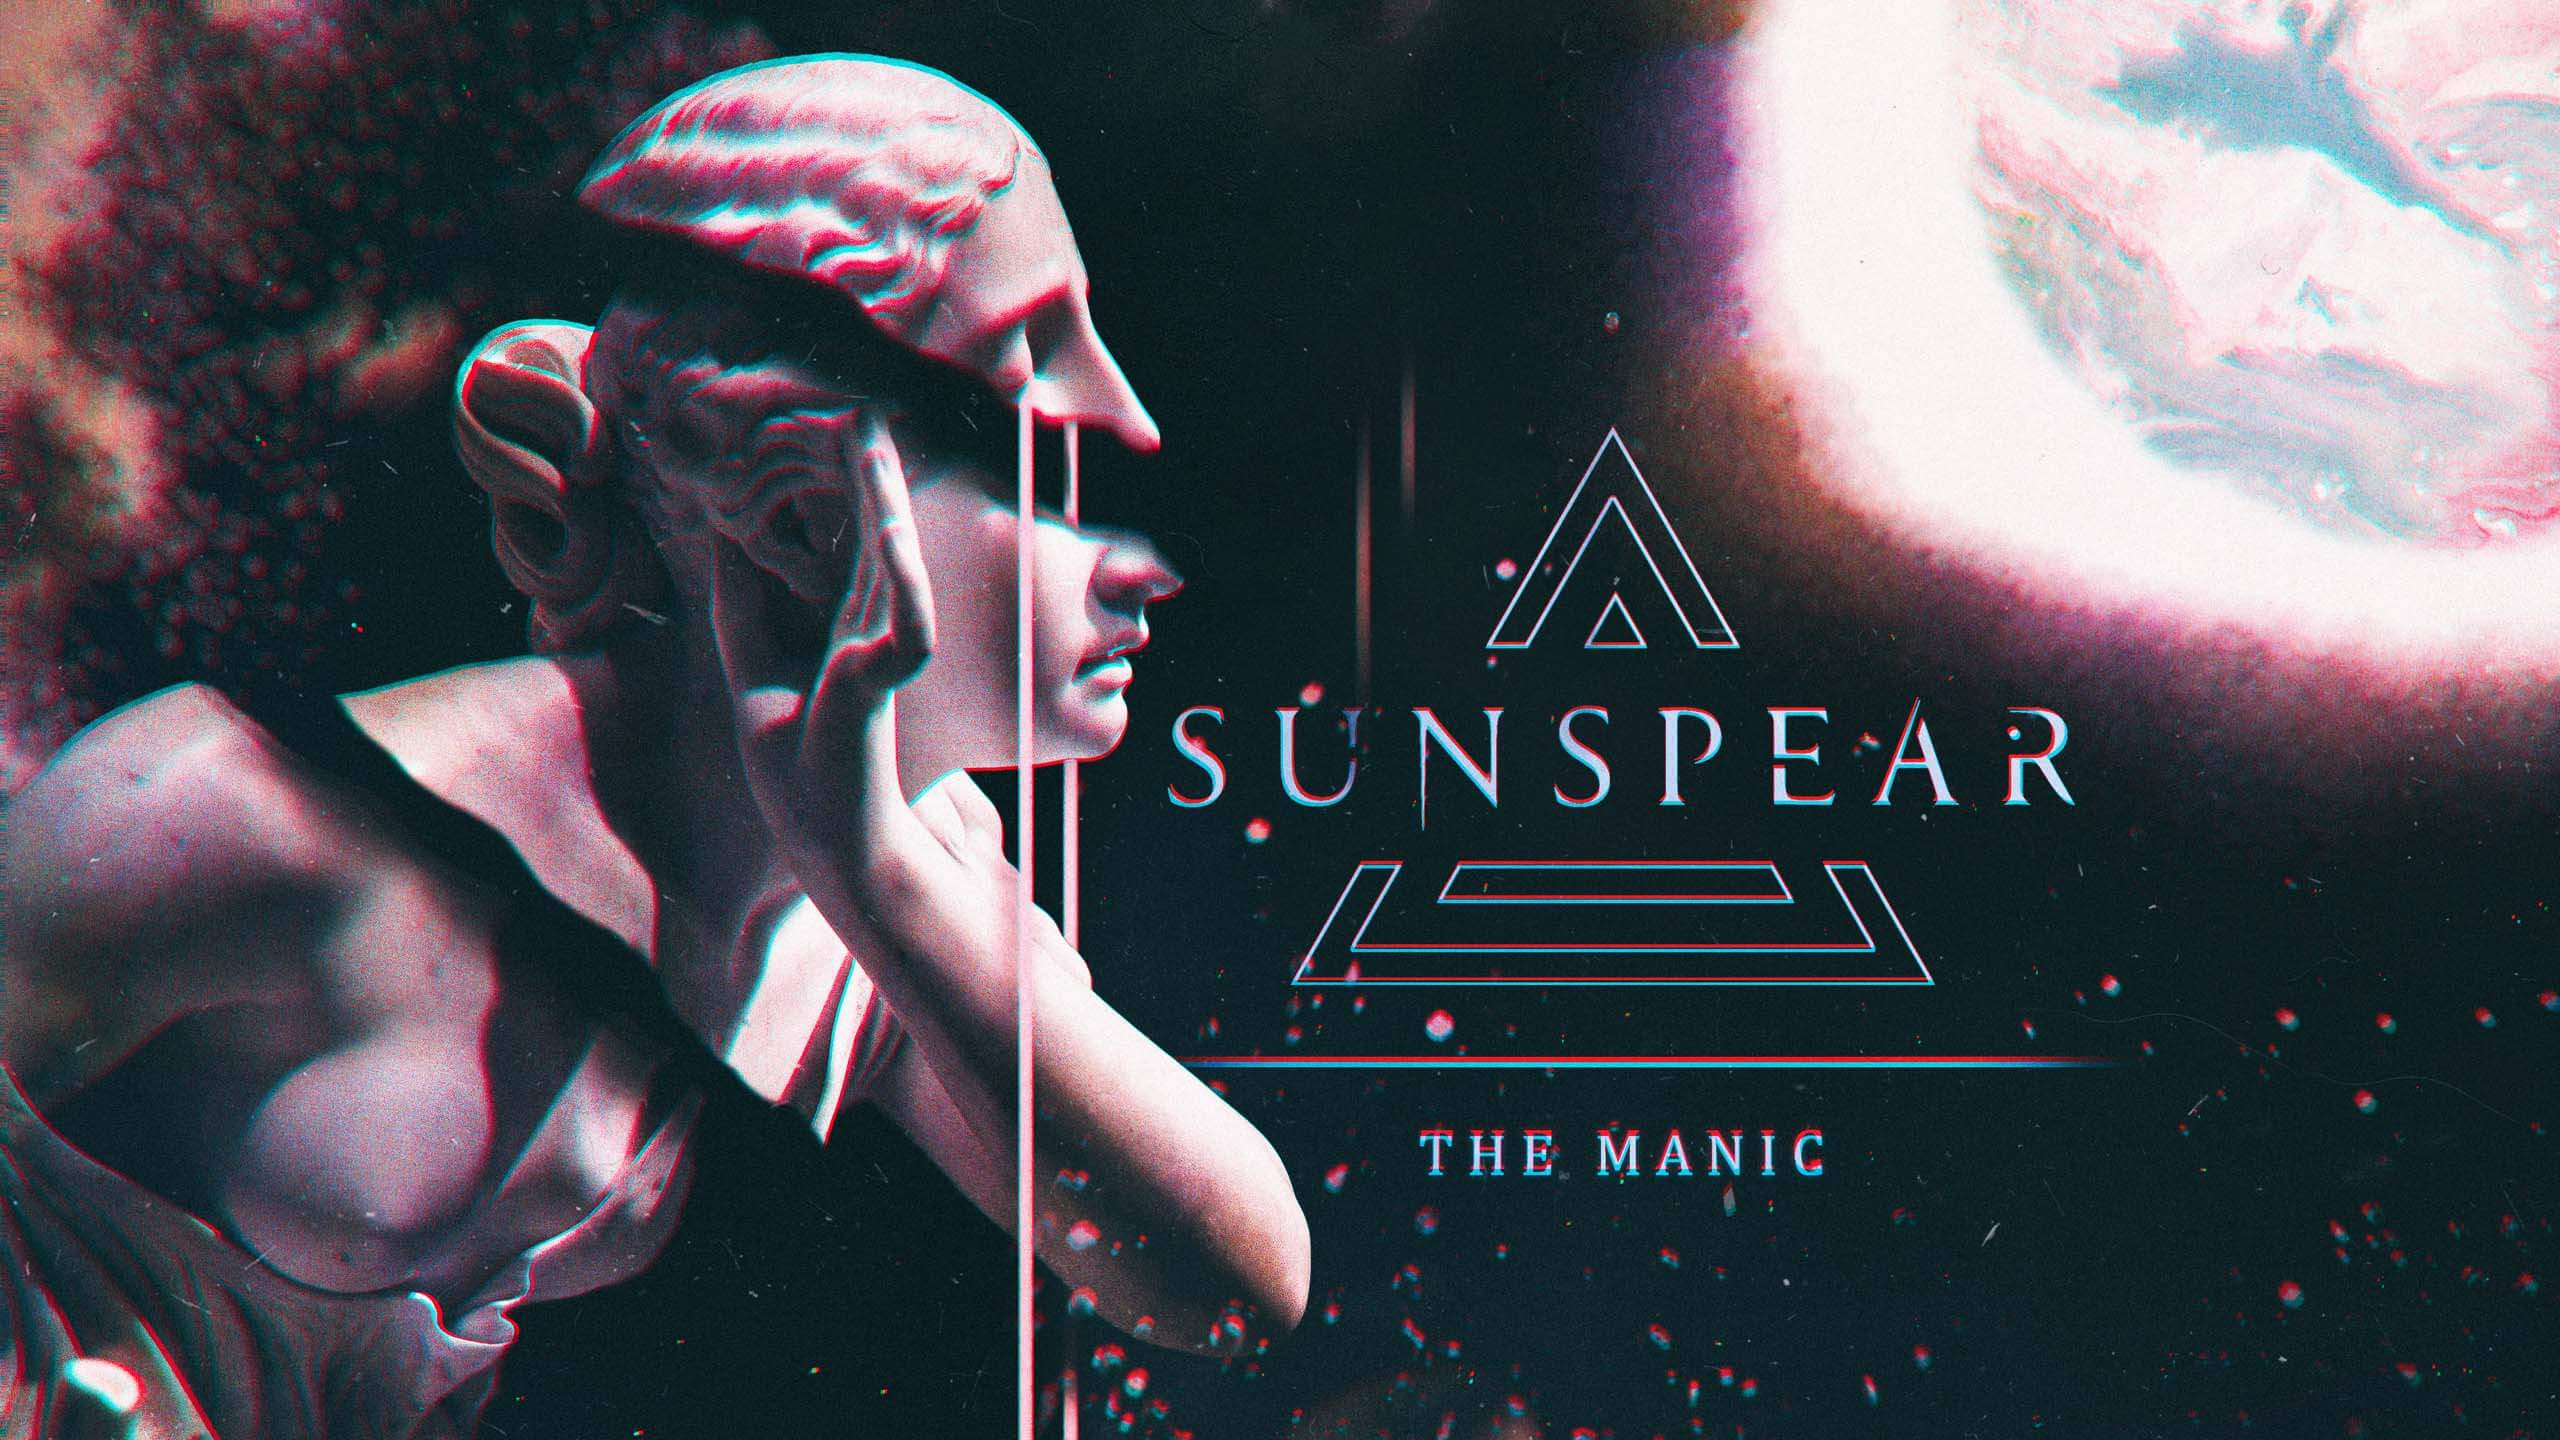 PREMIERE: SUNSPEAR RELEASE NEW SINGLE “THE MANIC” (TRACK ANALYSIS)